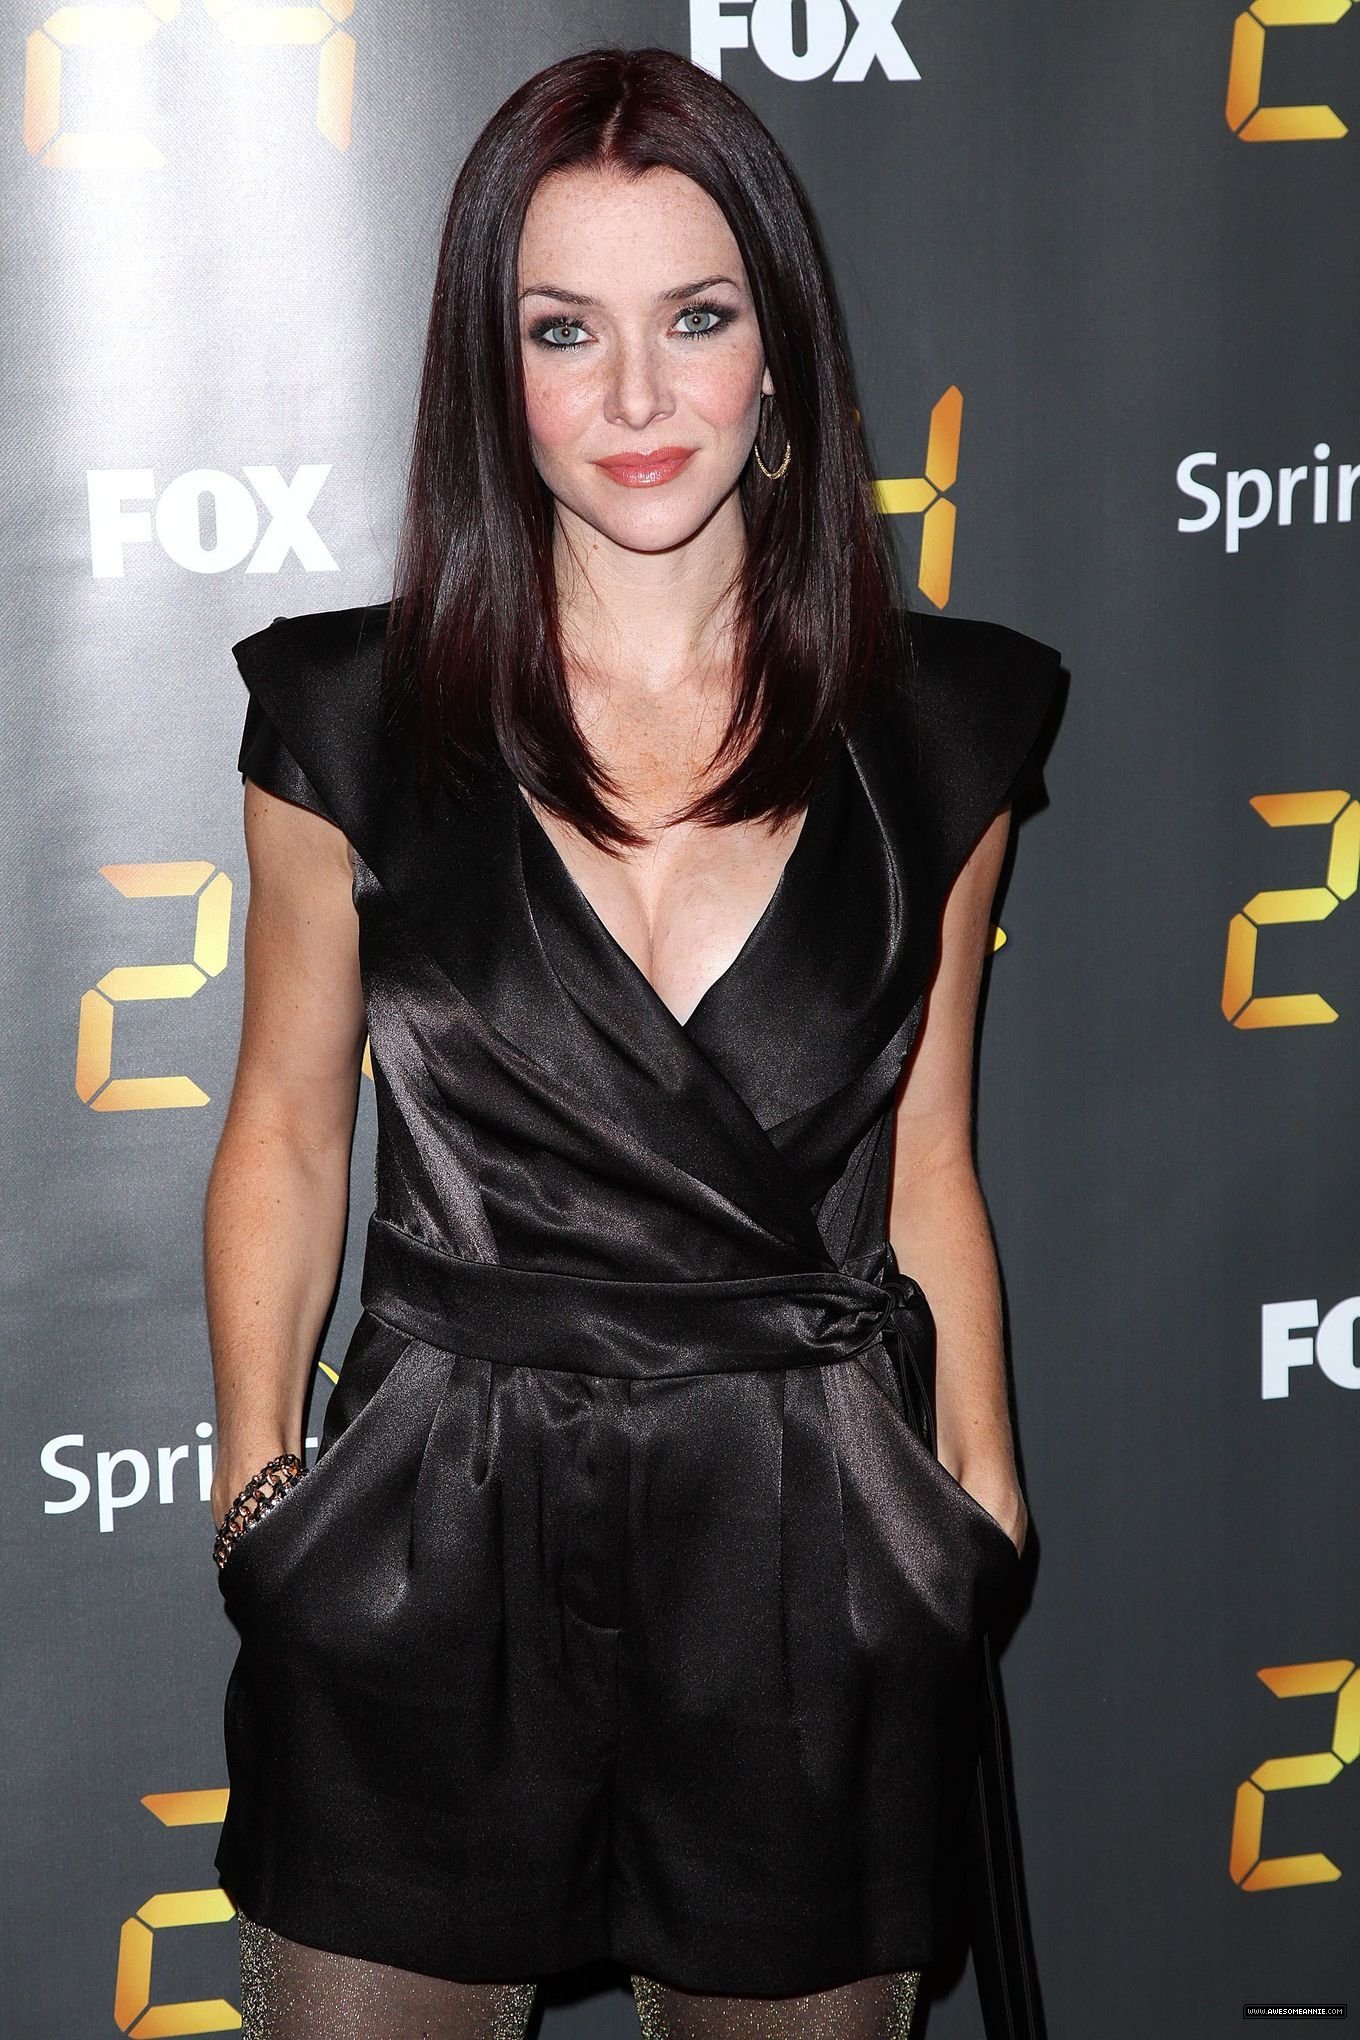 HAPPY BIRTHDAY TO THE LATE ANNIE WERSCHING WHO WOULD\VE TURNED 46 TODAY - RENEE WALKER FROM 24. 